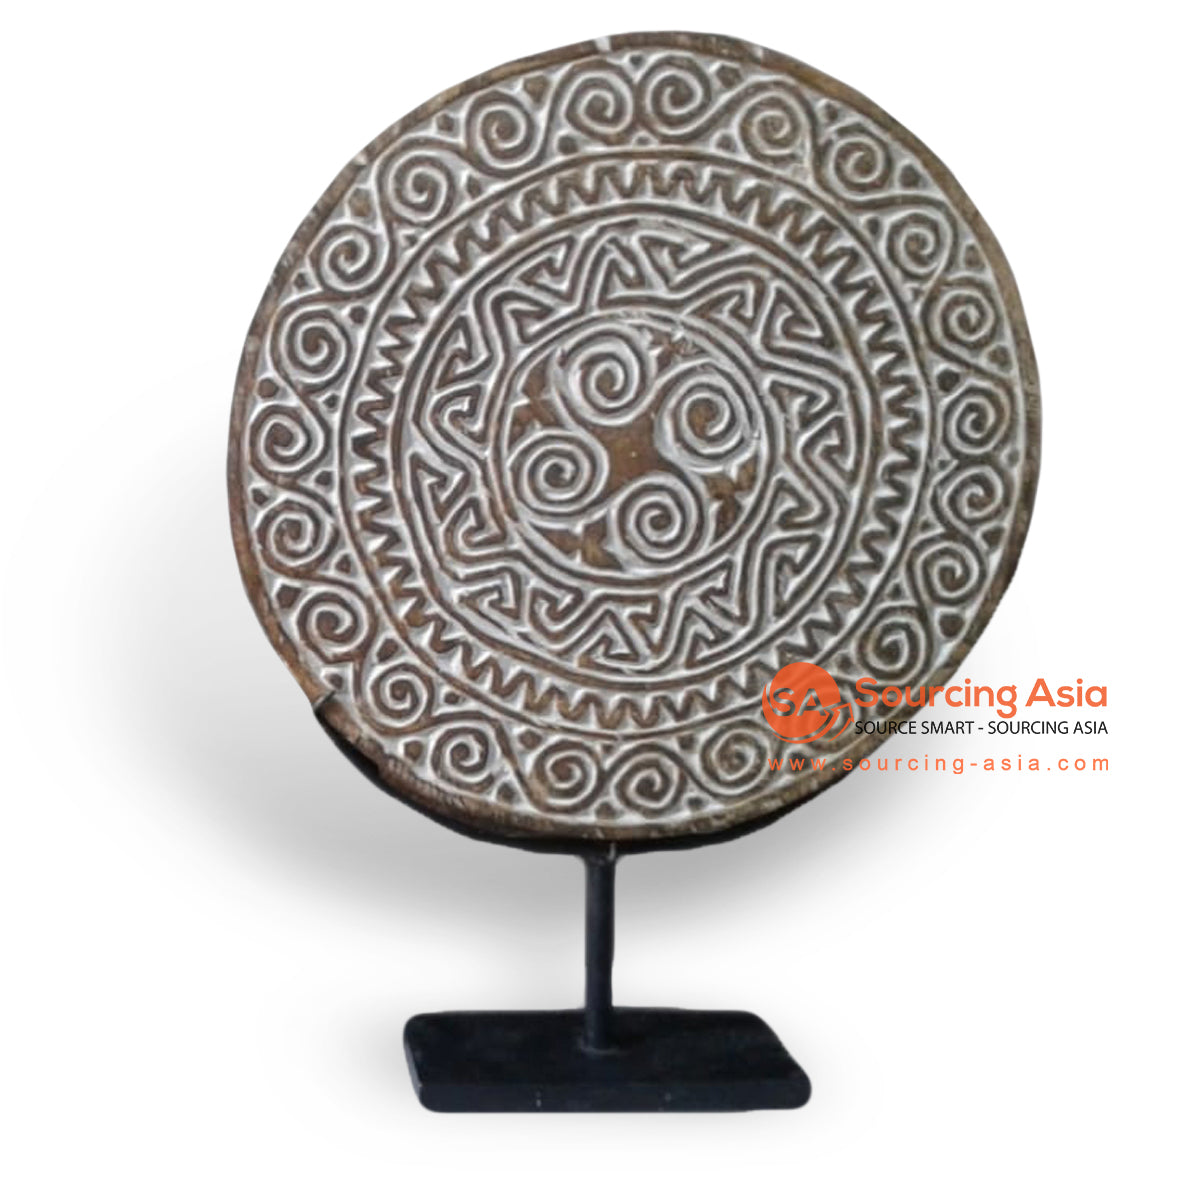 VICT015 WOODEN TRIBAL CARVED PLATE ON STAND DECORATION